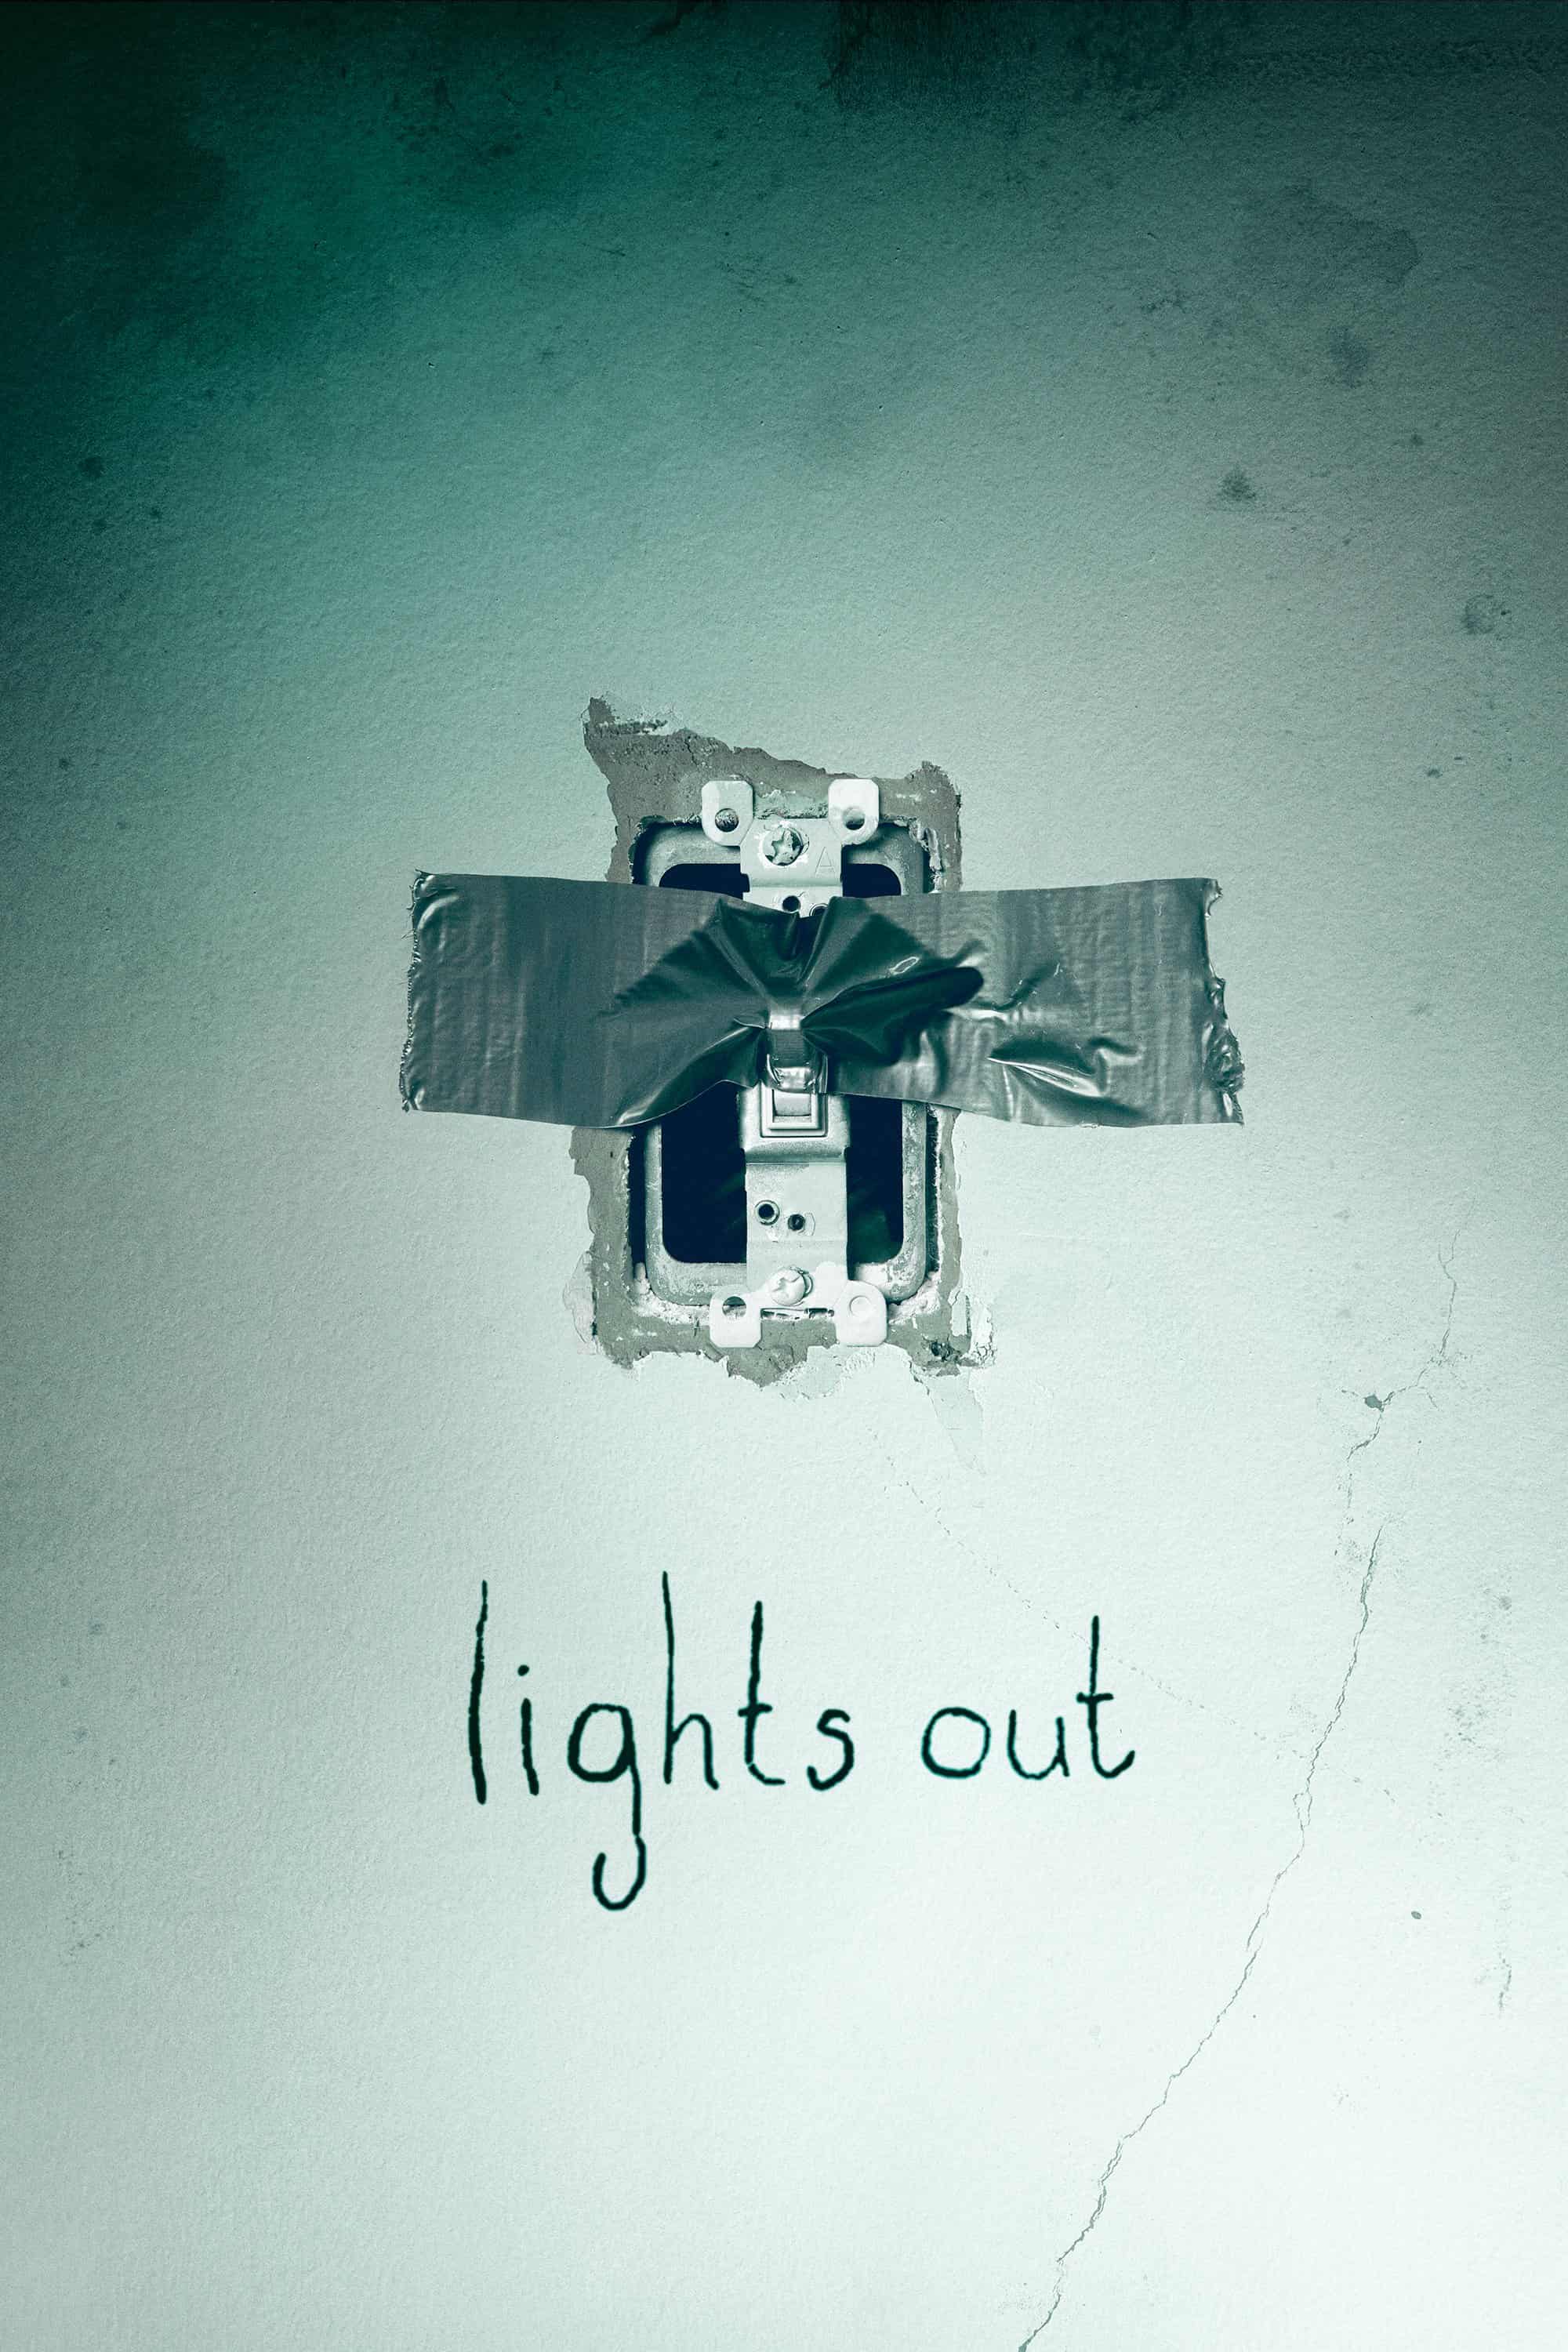 Lights Out, 2016 